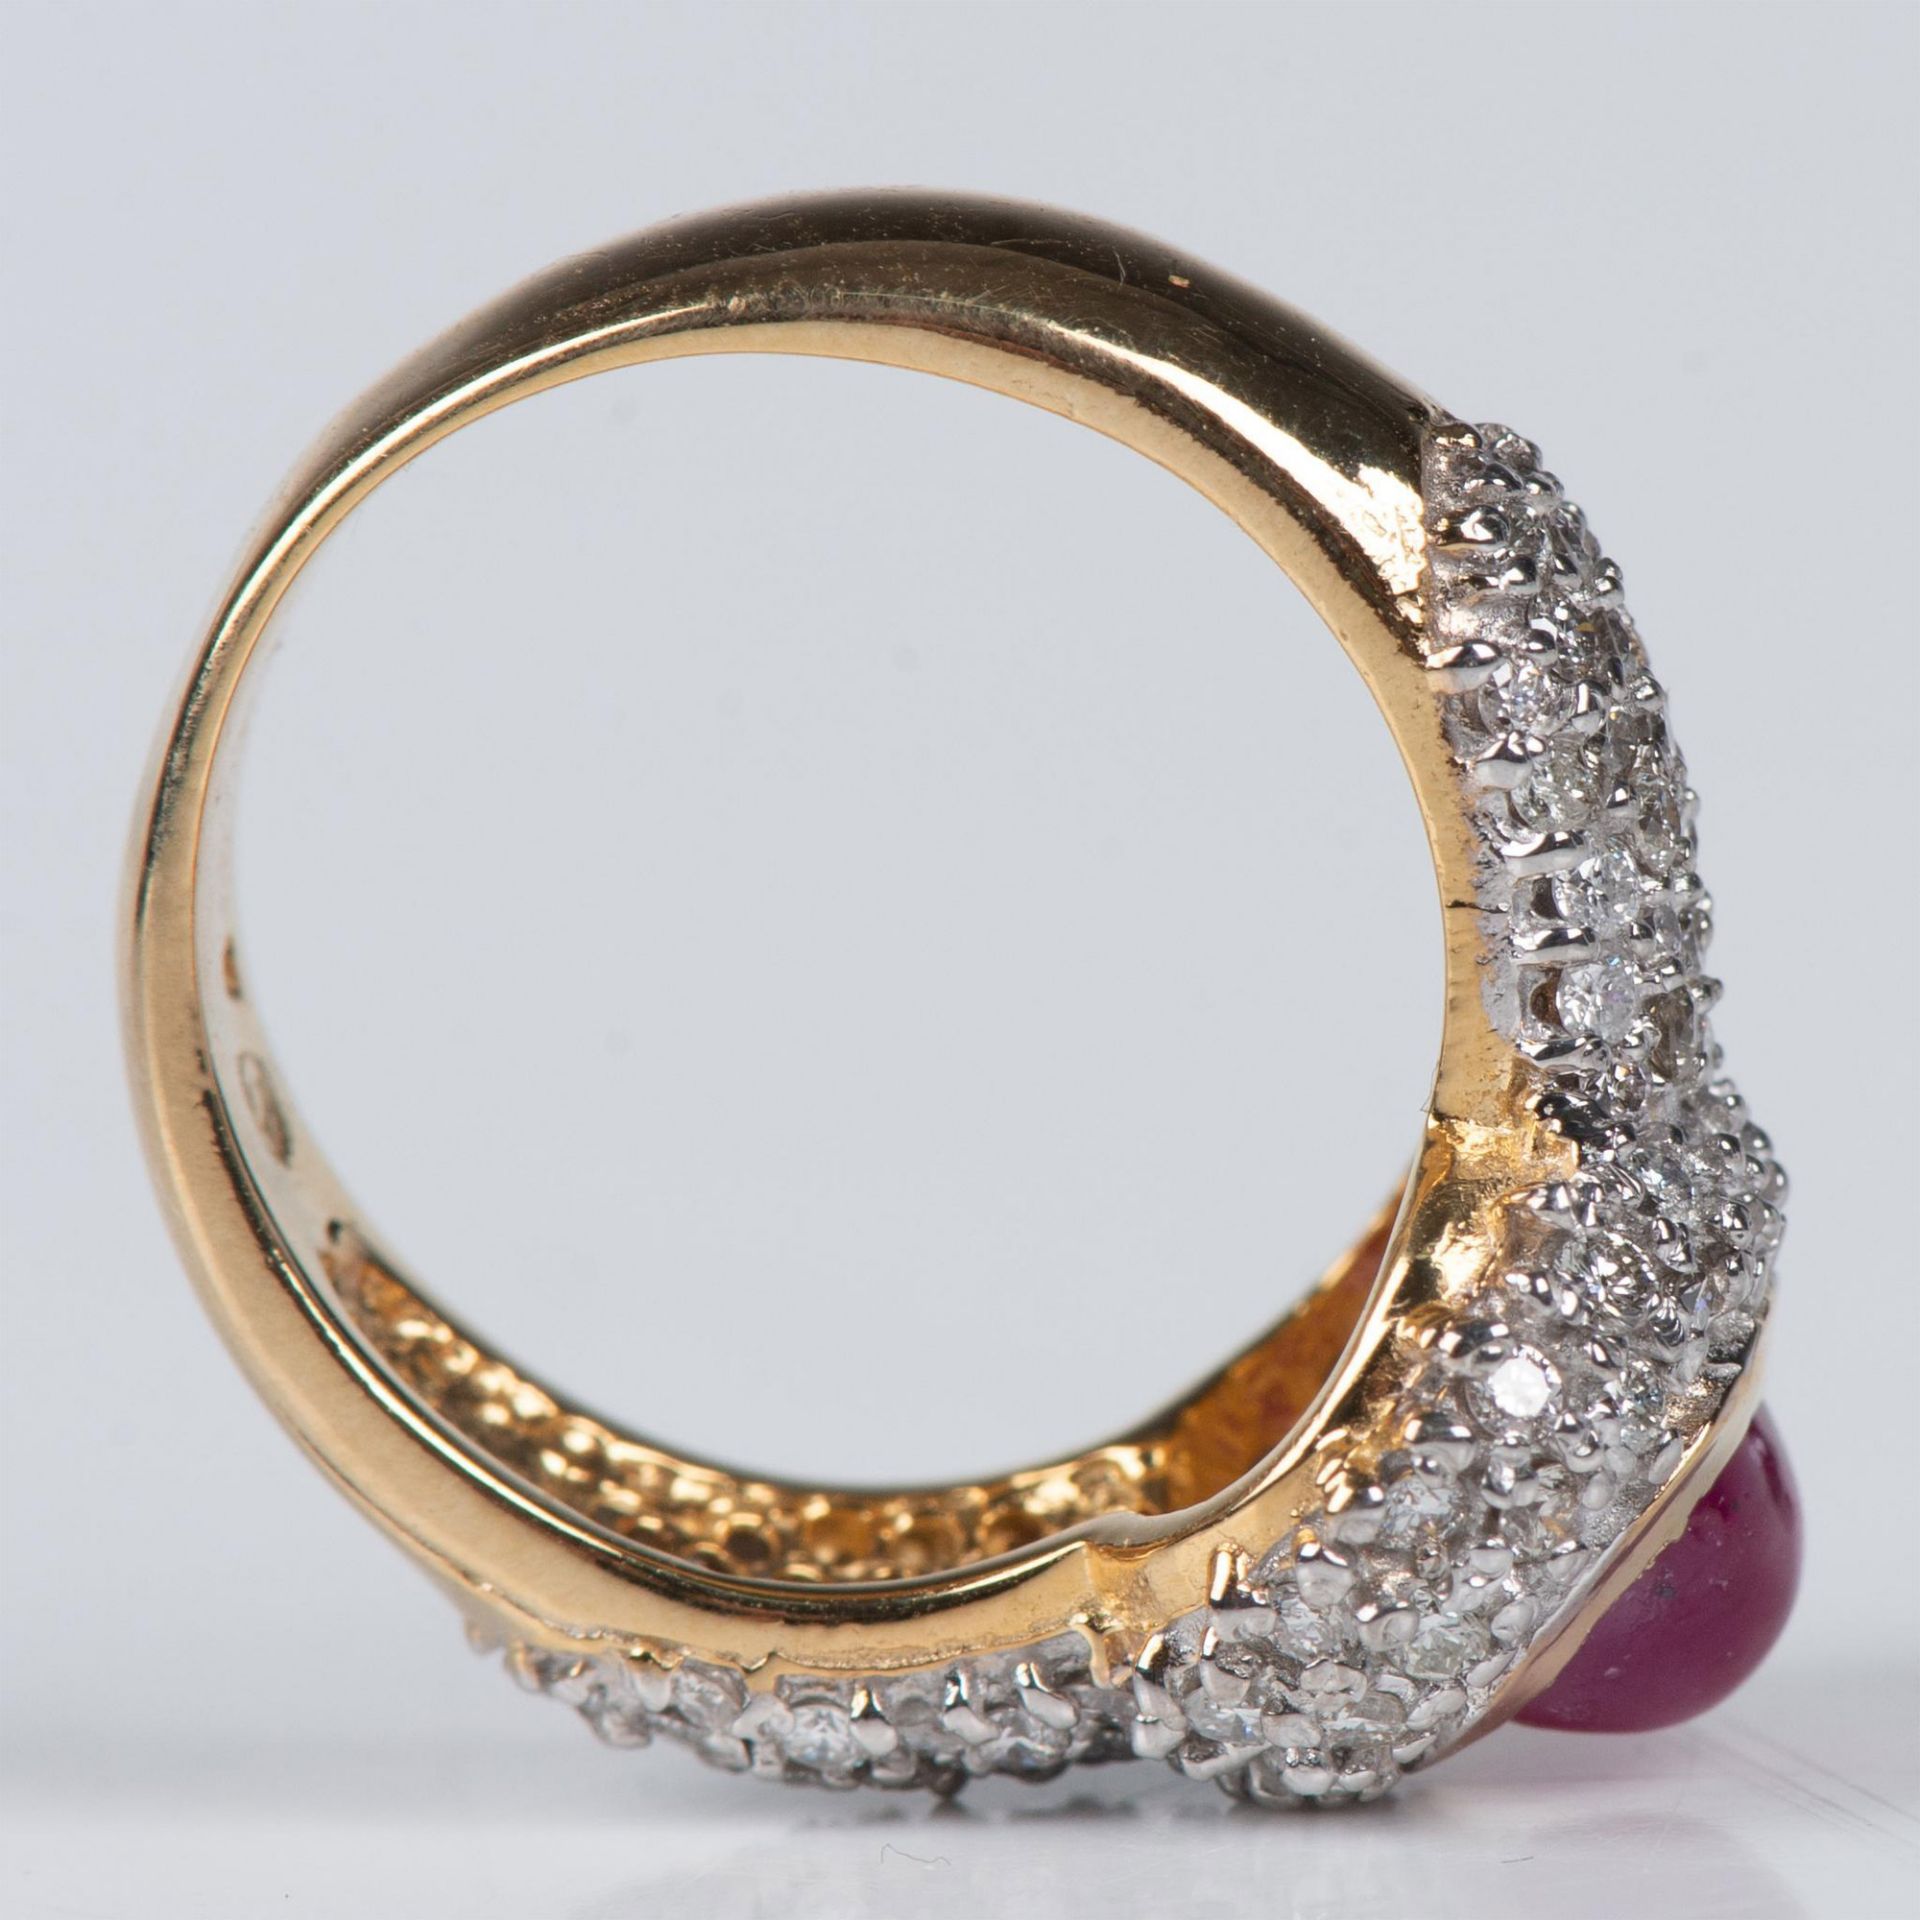 Fabulous 14K Yellow Gold, Diamond, and Ruby 2.9ctw Ring - Image 9 of 11